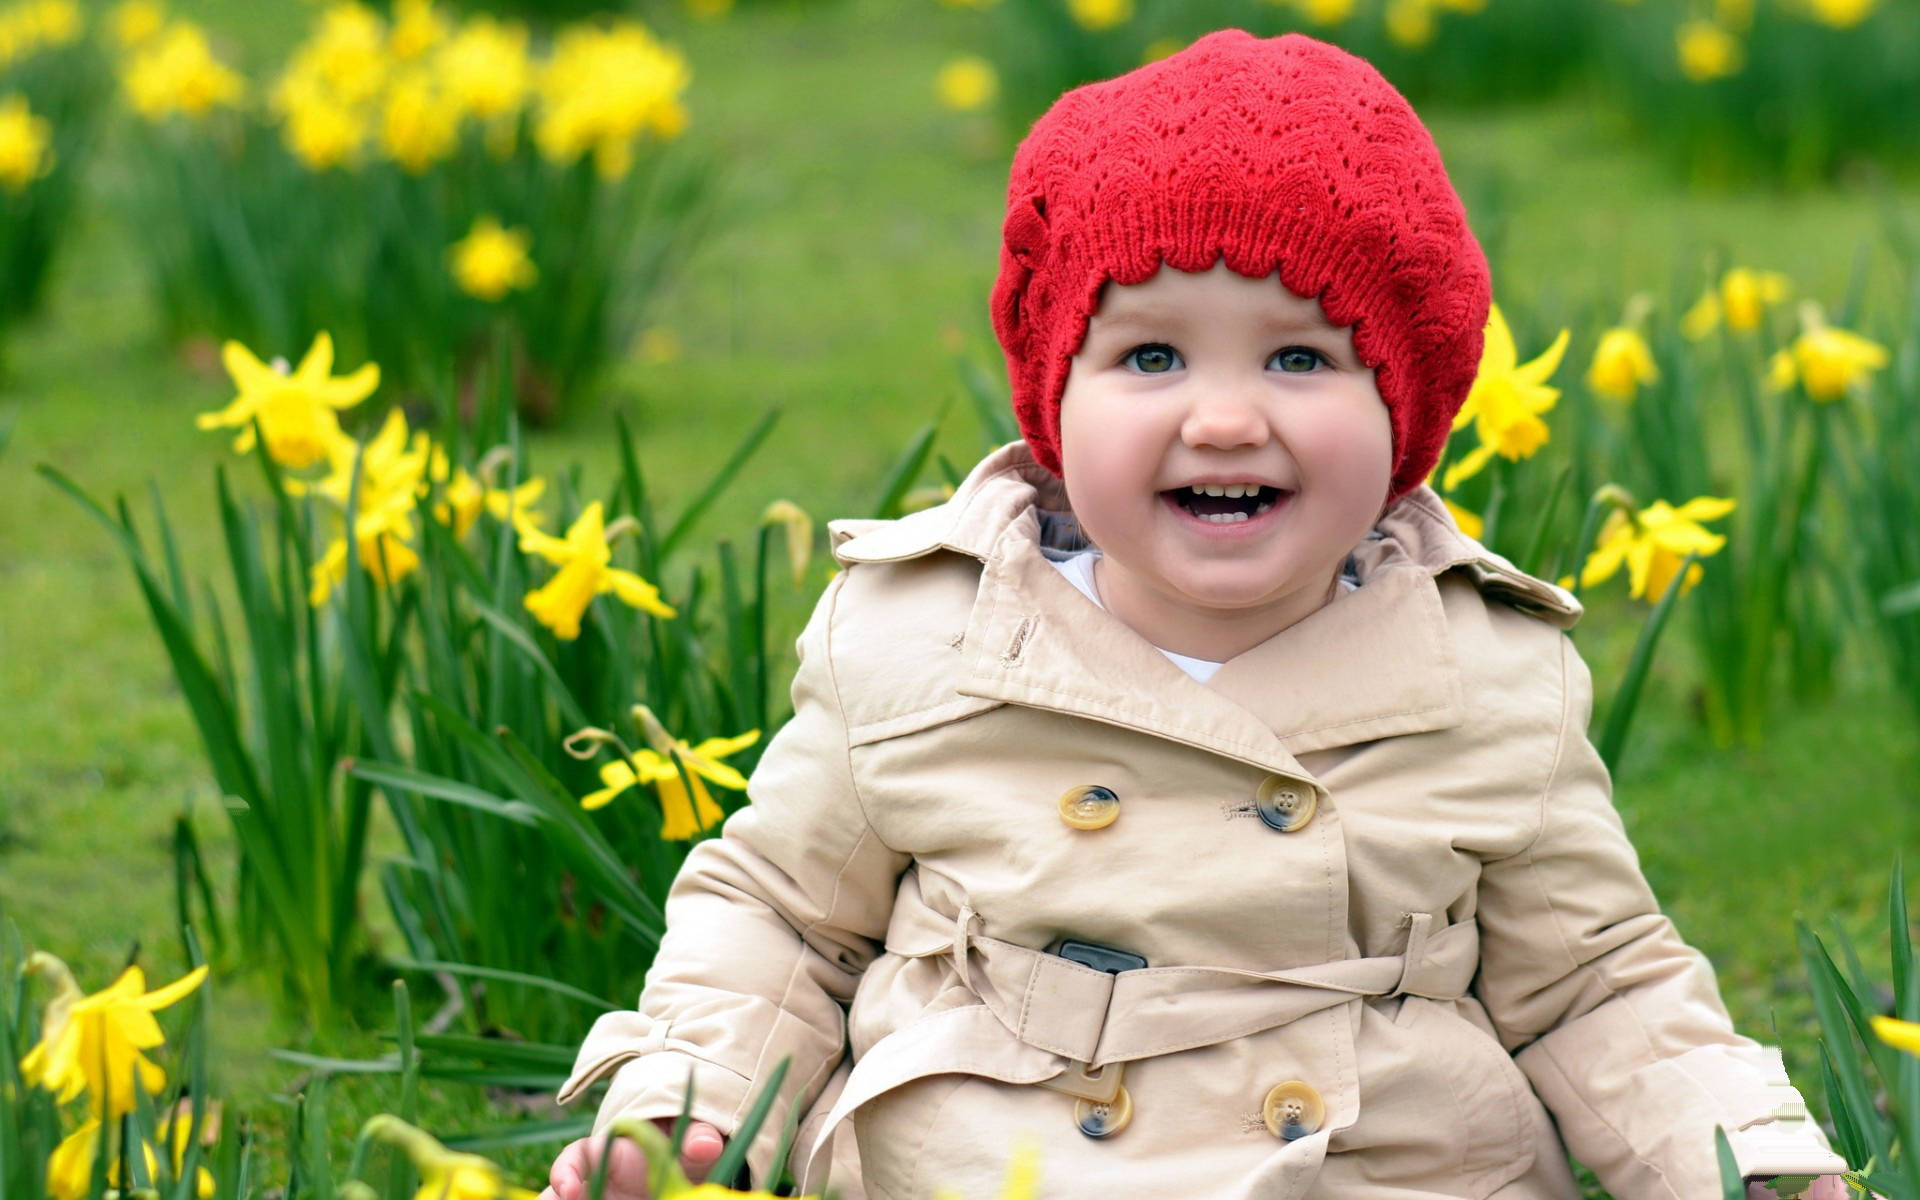 Smiling Child And Daffodil Flowers Wallpaper